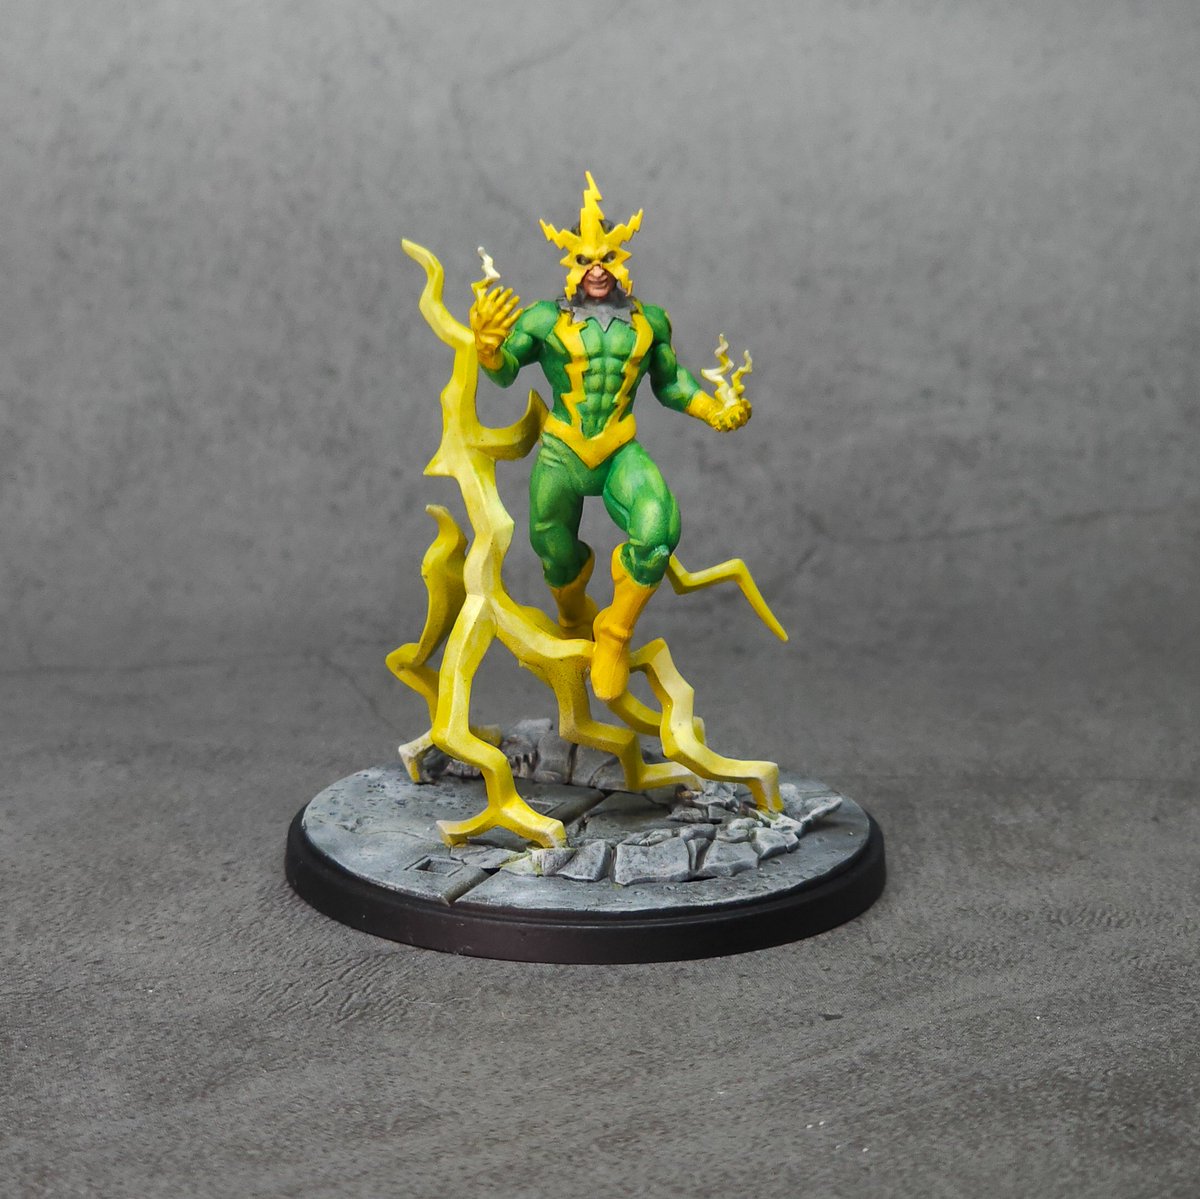 Danger, Danger! High voltage!

Electro was zapped out yesterday, speed paint style. Wanted to try and work quickly with unforgiving, light colours. Worked out well, I feel.

Thanks @atomicmassgames !

#marvelcrisisprotocol #mcp #minipainting #paintslam24 #tabletop